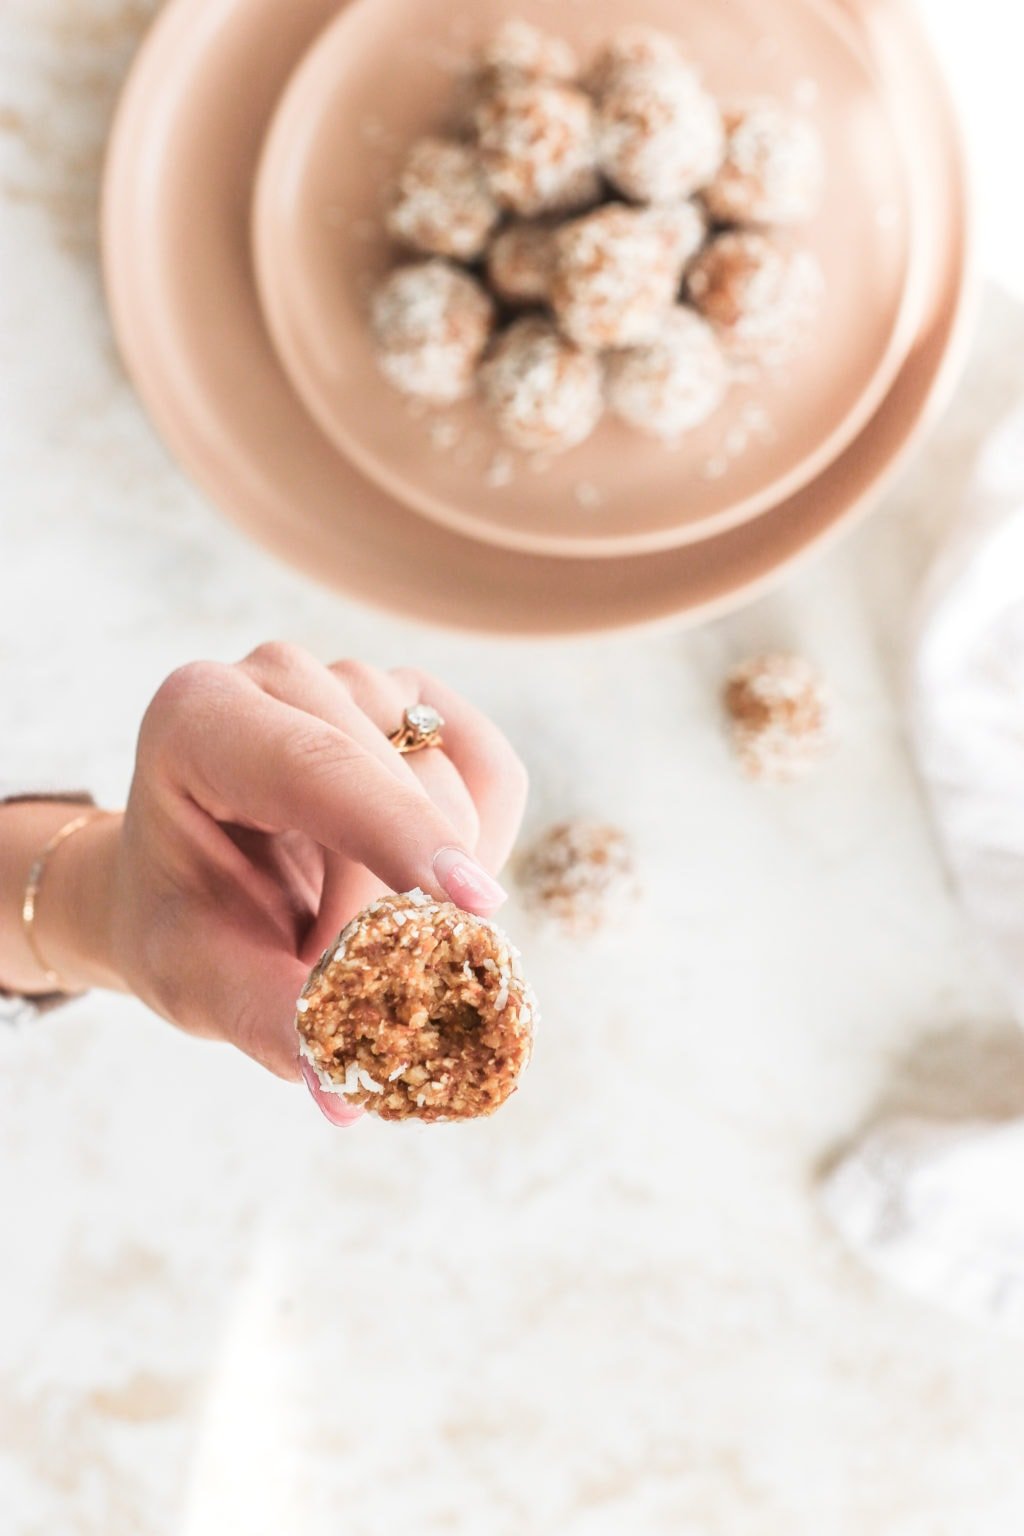 A hand is holding an energy ball with a bite taken out of it. There is a blurred out plate of energy balls in the background.